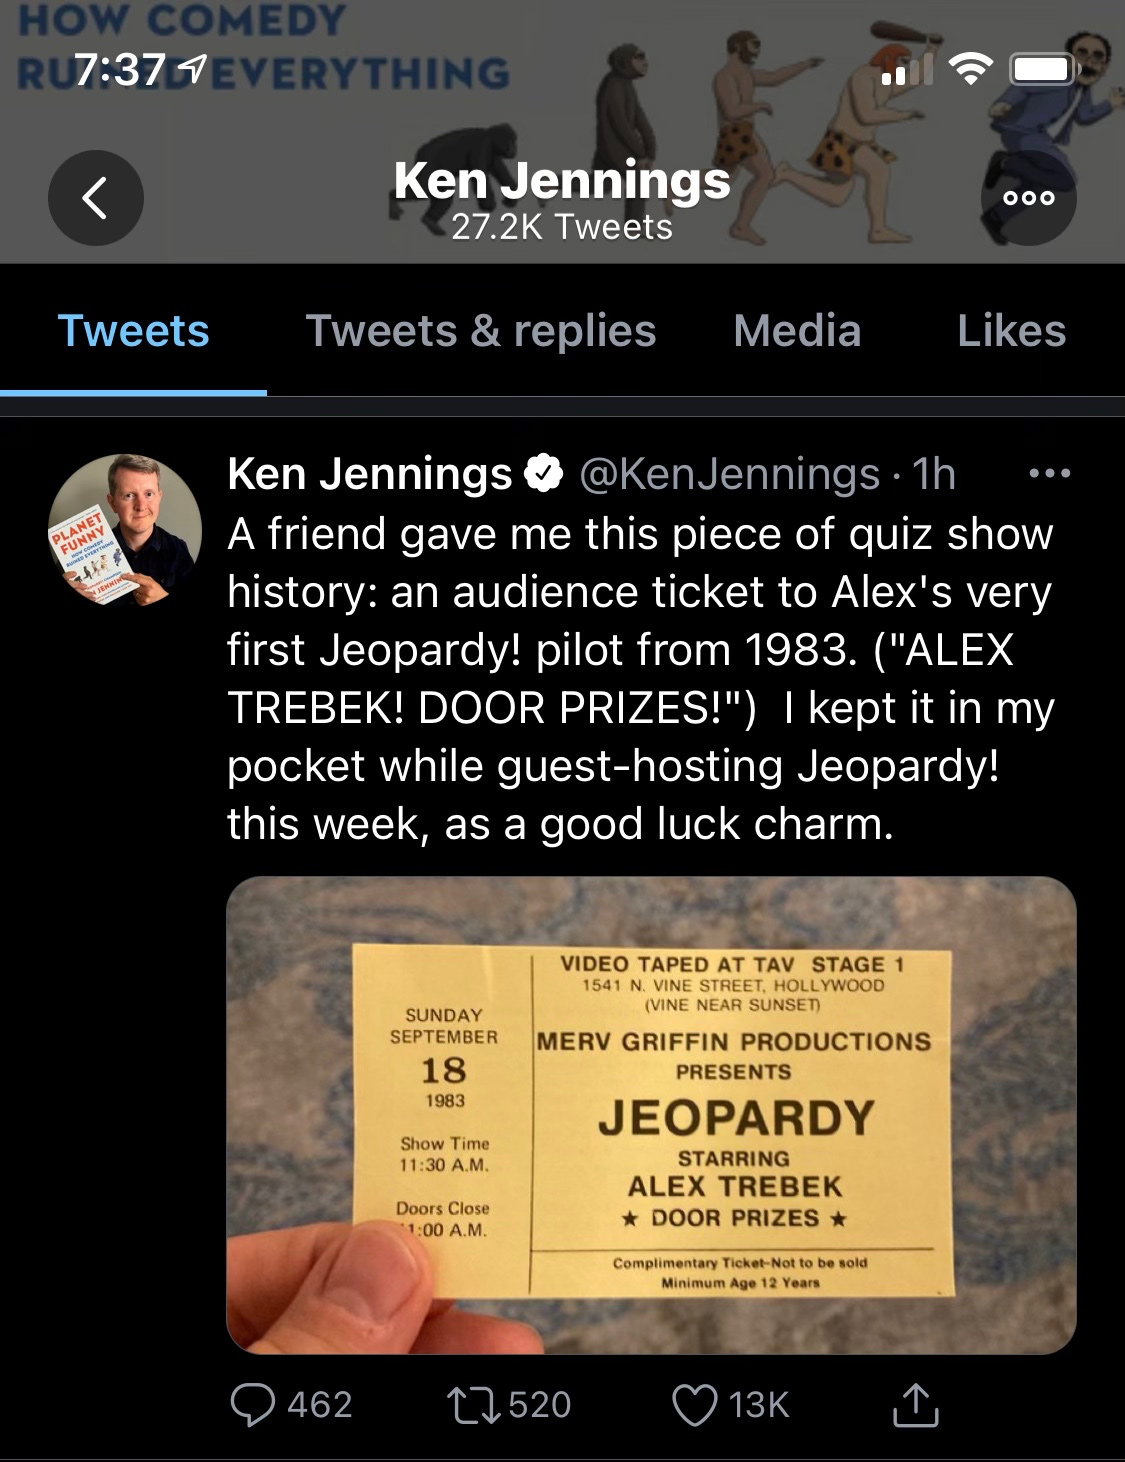 Tweet from Ken Jennings with a picture of the ticket Bob Boden gave him: "A friend gave me this piece of quiz show history: an audience ticket to Alex's very first Jeopardy! pilot from 1983. ("ALEX TREBEK! DOOR PRIZES!") I kept it in my pocket while guest-hosting Jeopardy! this week, as a good luck charm."